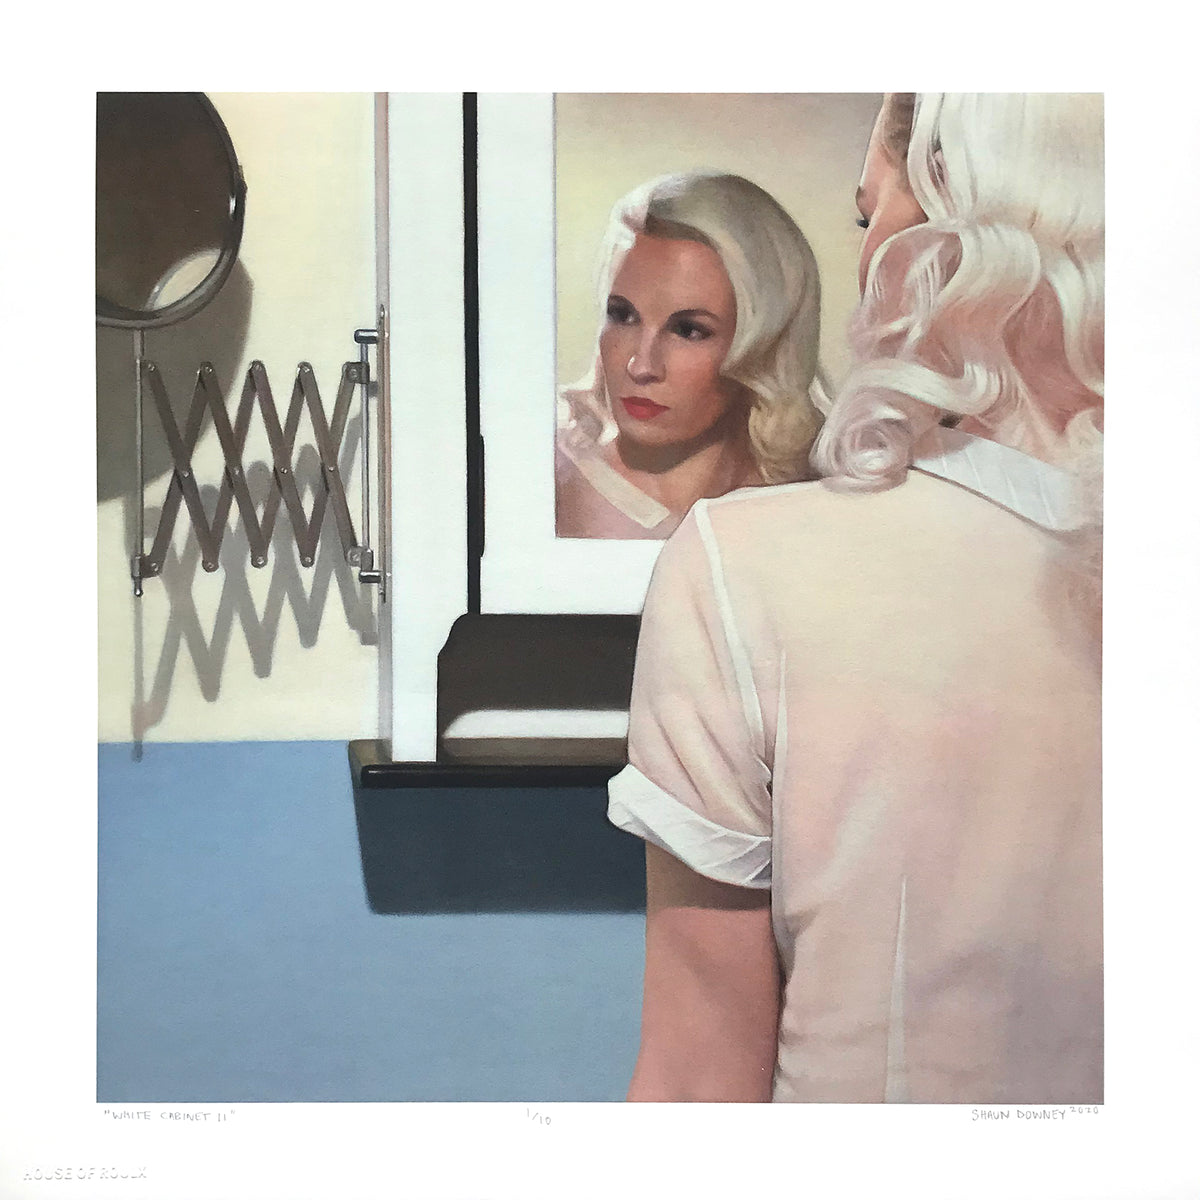 Shaun Downey &quot;White Cabinet II&quot; - Archival Print, Limited Edition of 10 - 12 x 12&quot;